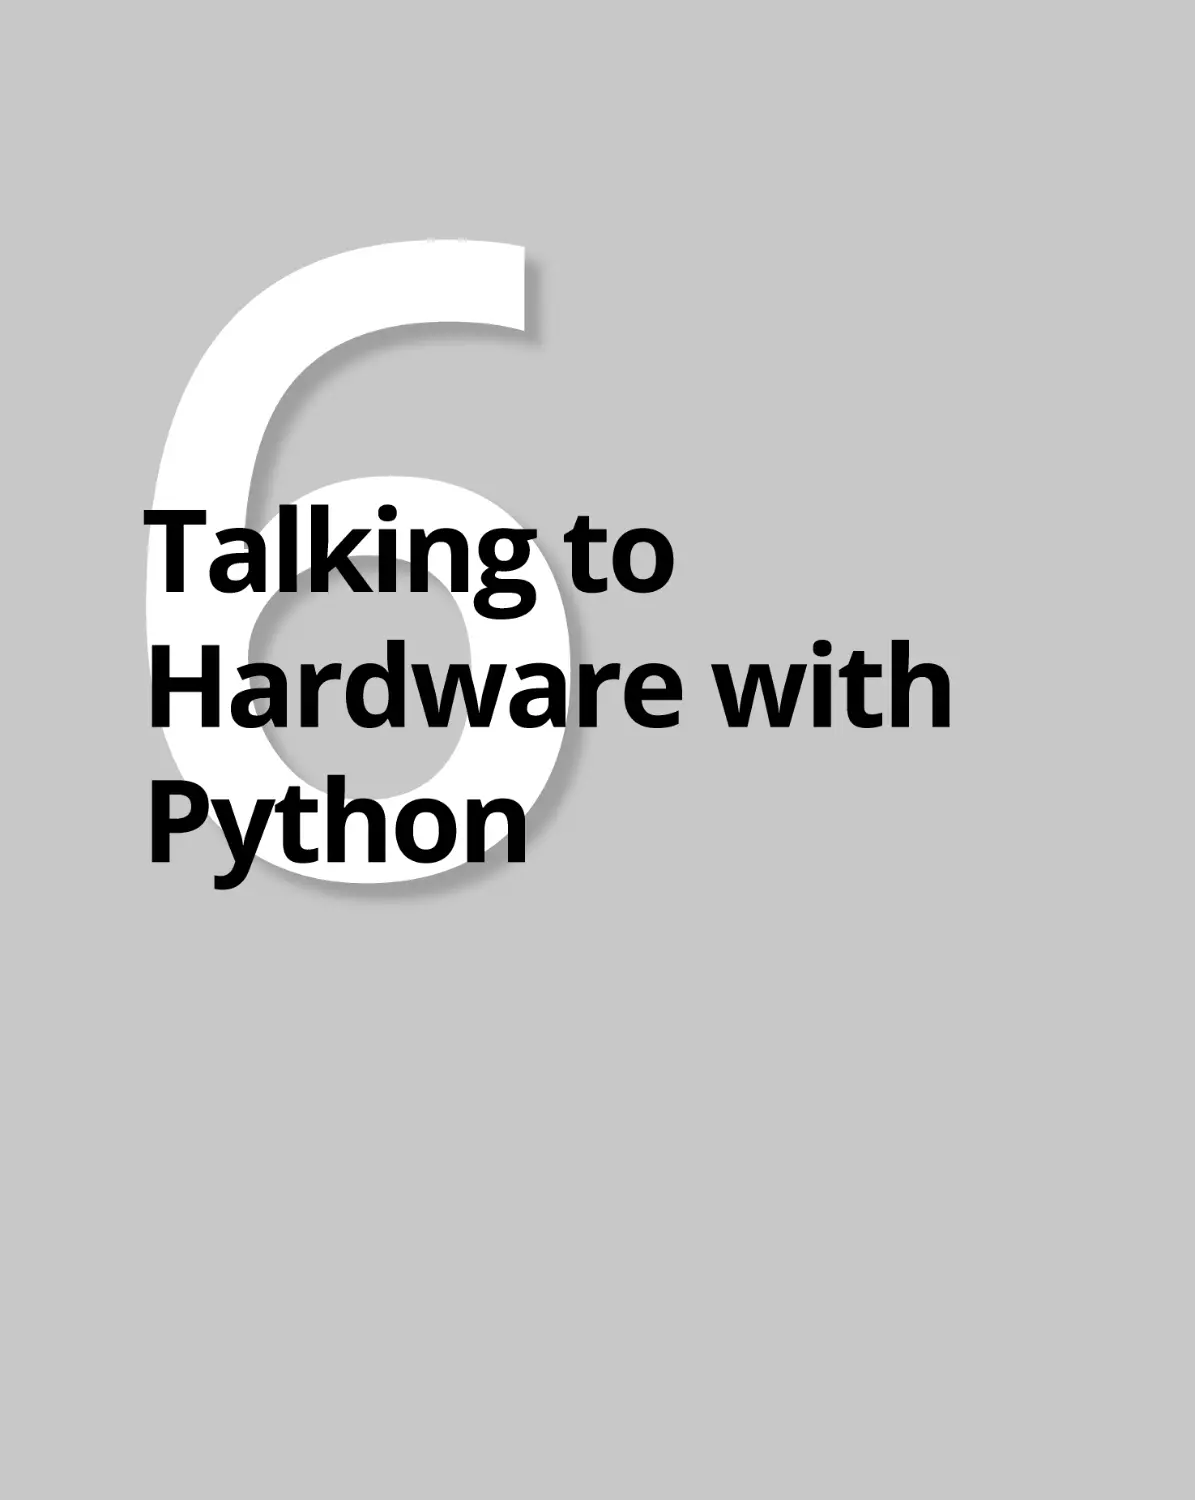 Book
6 Talking to Hardware with Python